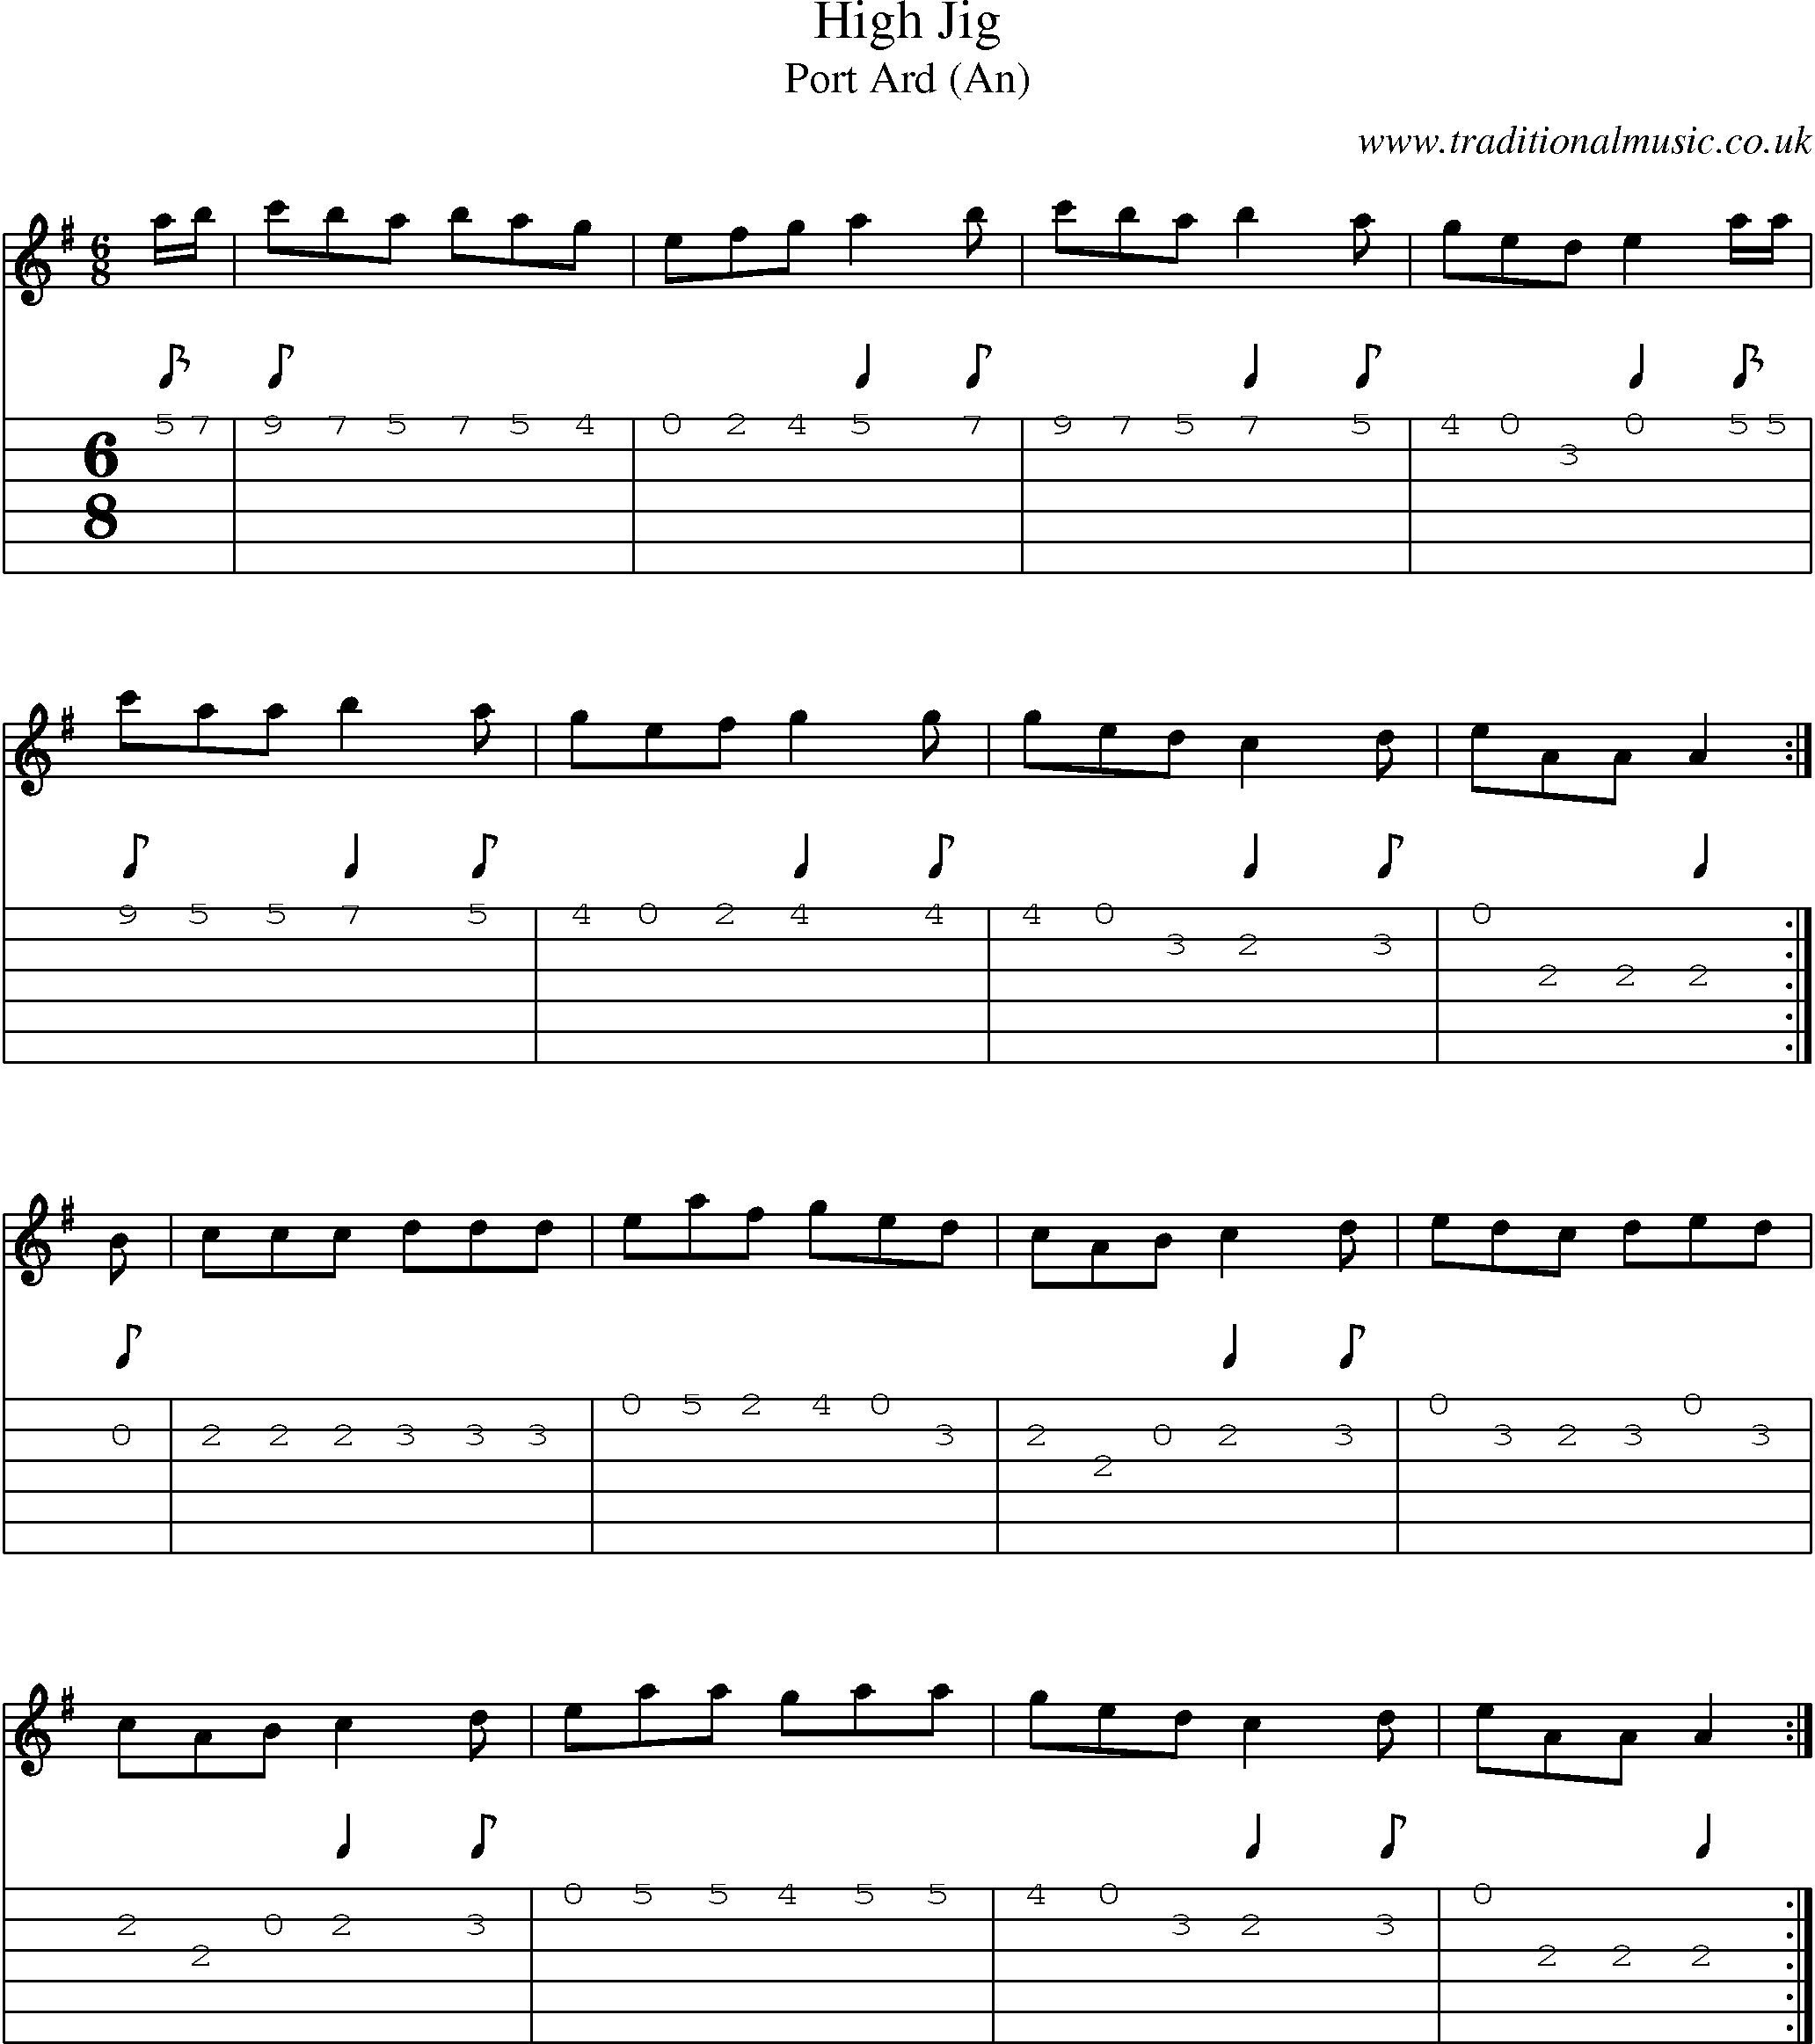 Music Score and Guitar Tabs for High Jig